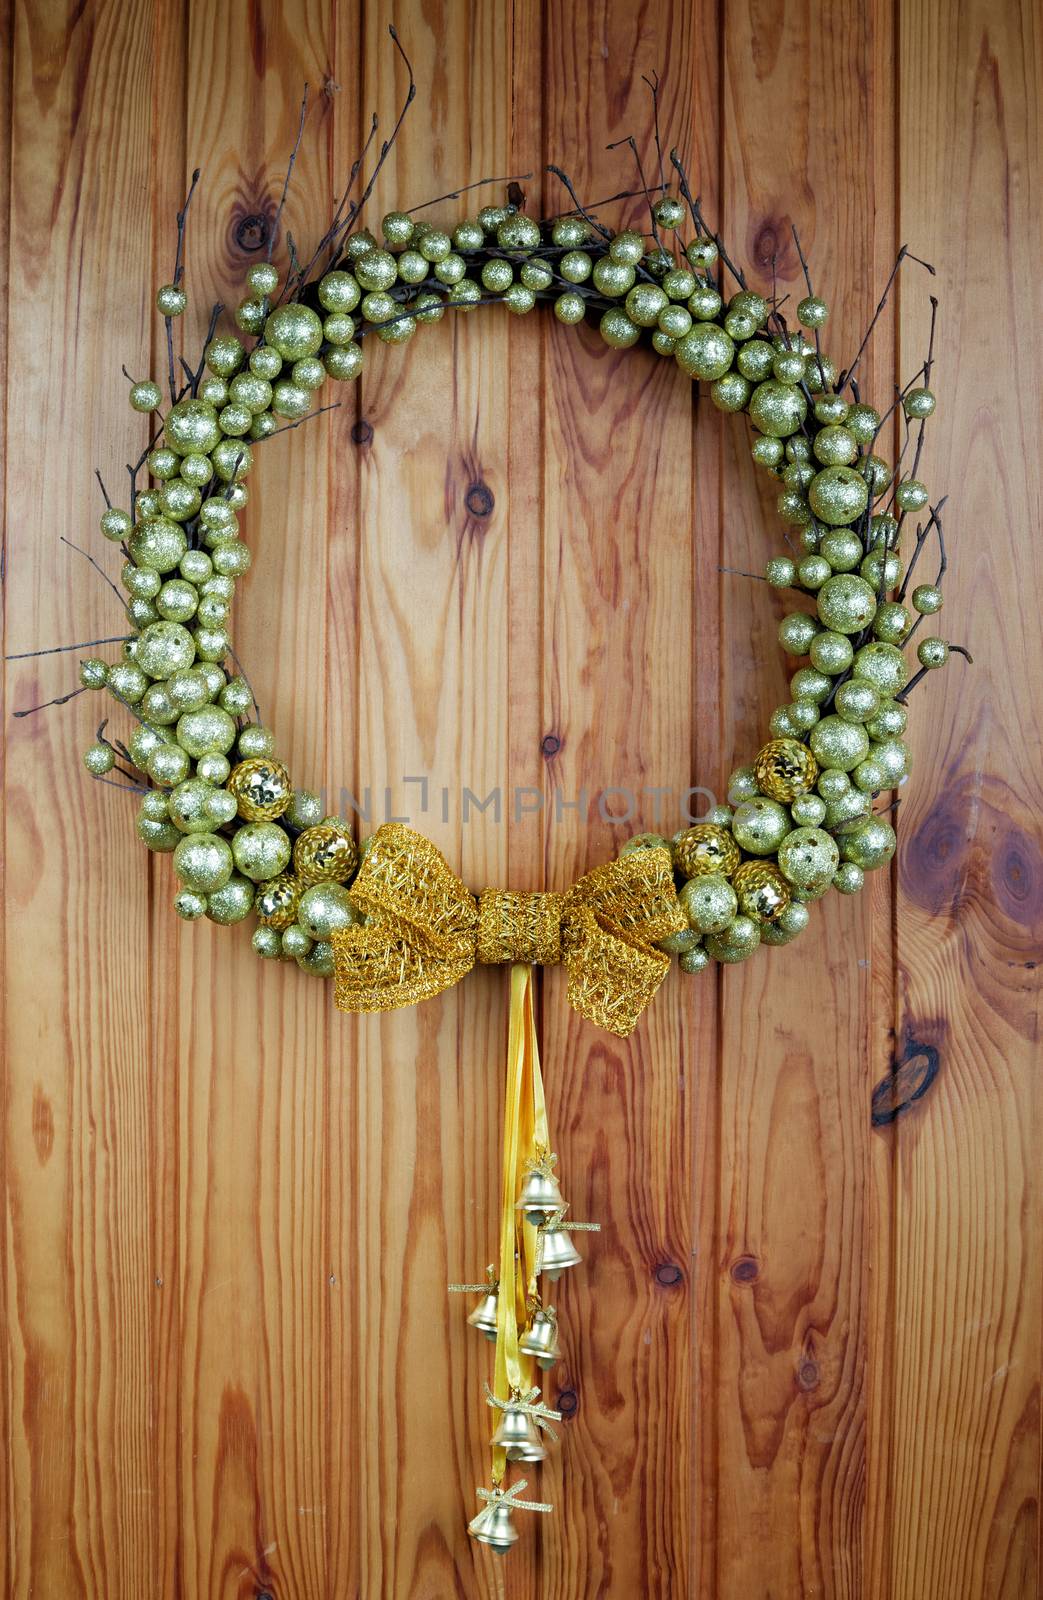 The wedding wreath hangs on a wooden wall by alarich